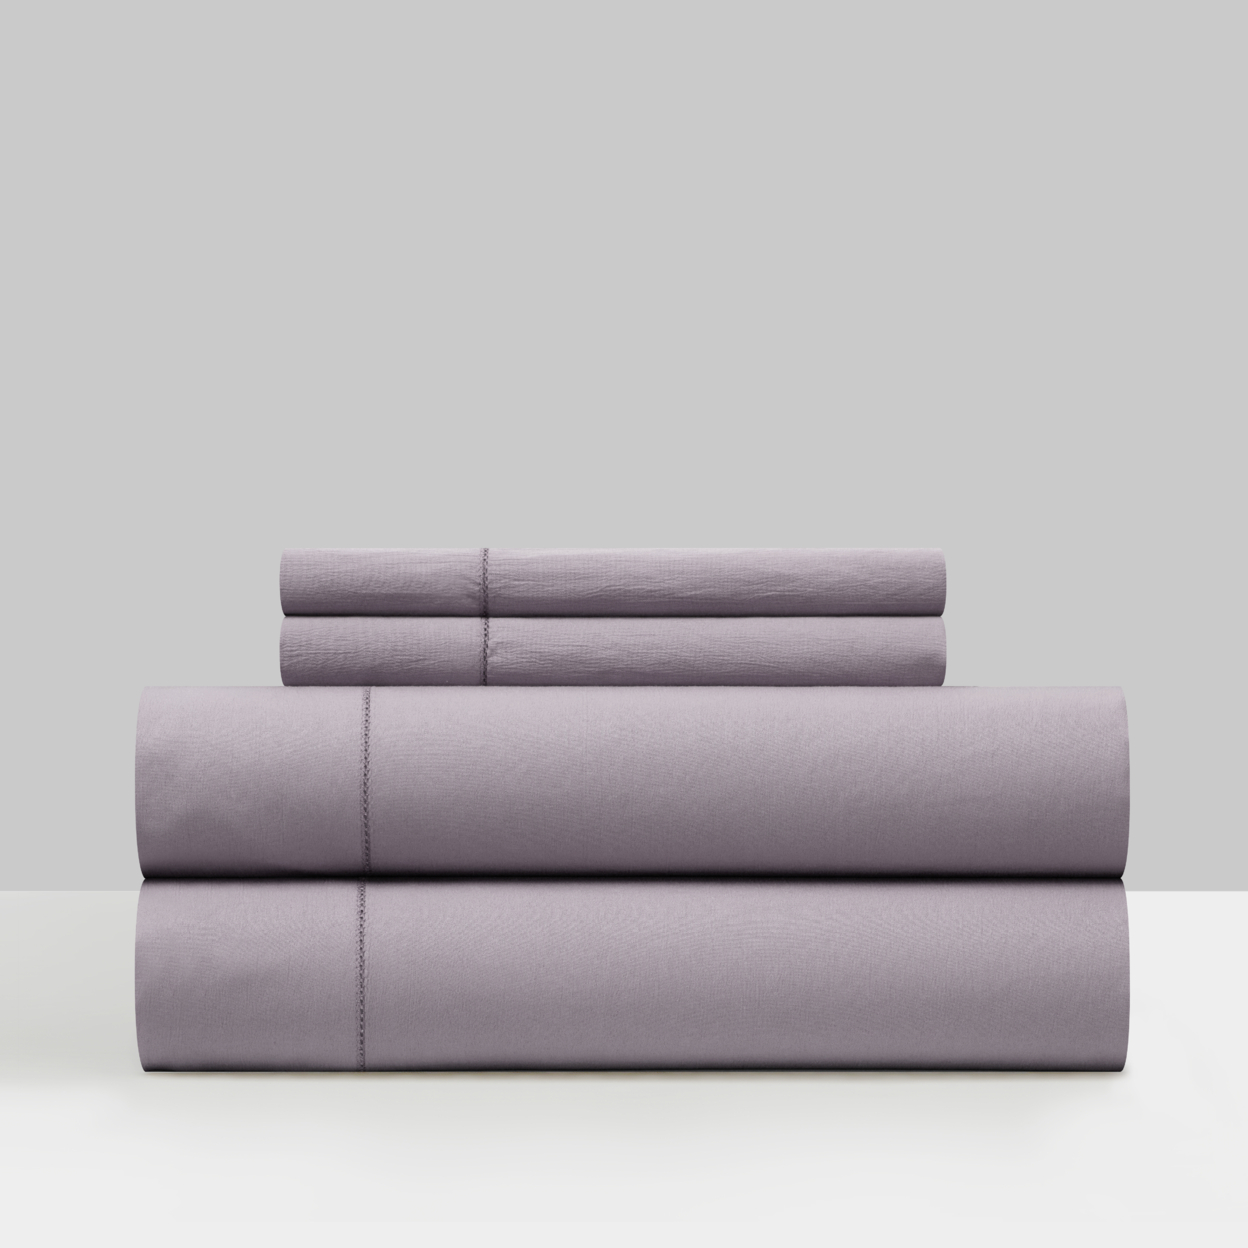 Daisy 3 Or 4 Piece Sheet Set Solid Color Washed Garment Technique - Lavender, King